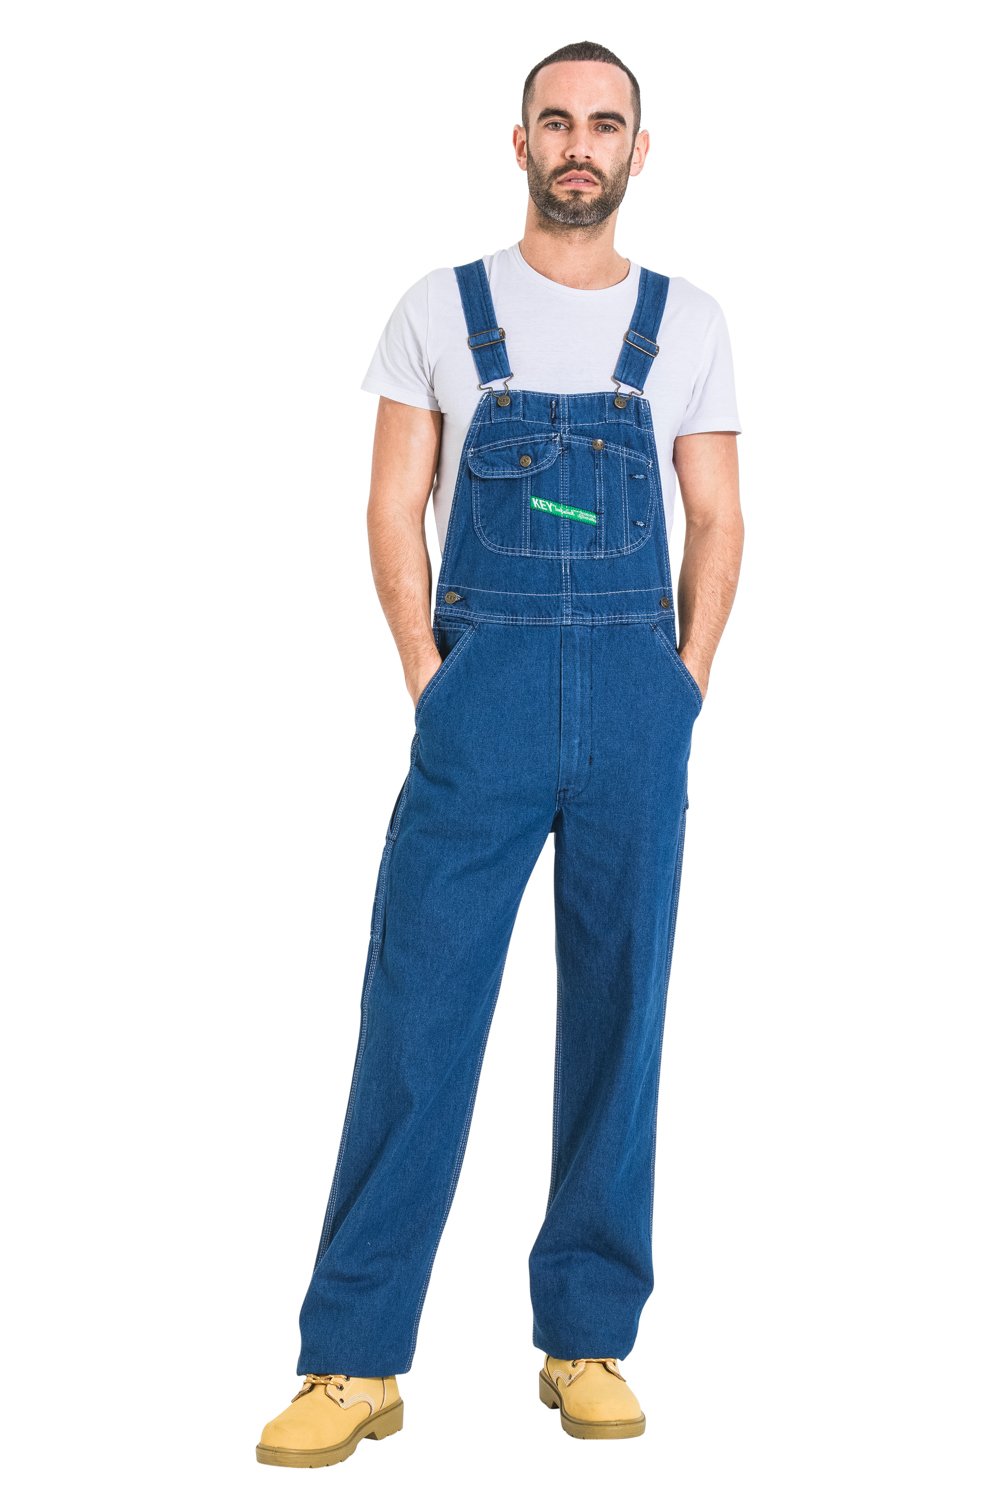 Full-length front view with hands in pockets, wearing ‘Key Apparel USA’ bib-overall made with premium materials and superior finish.